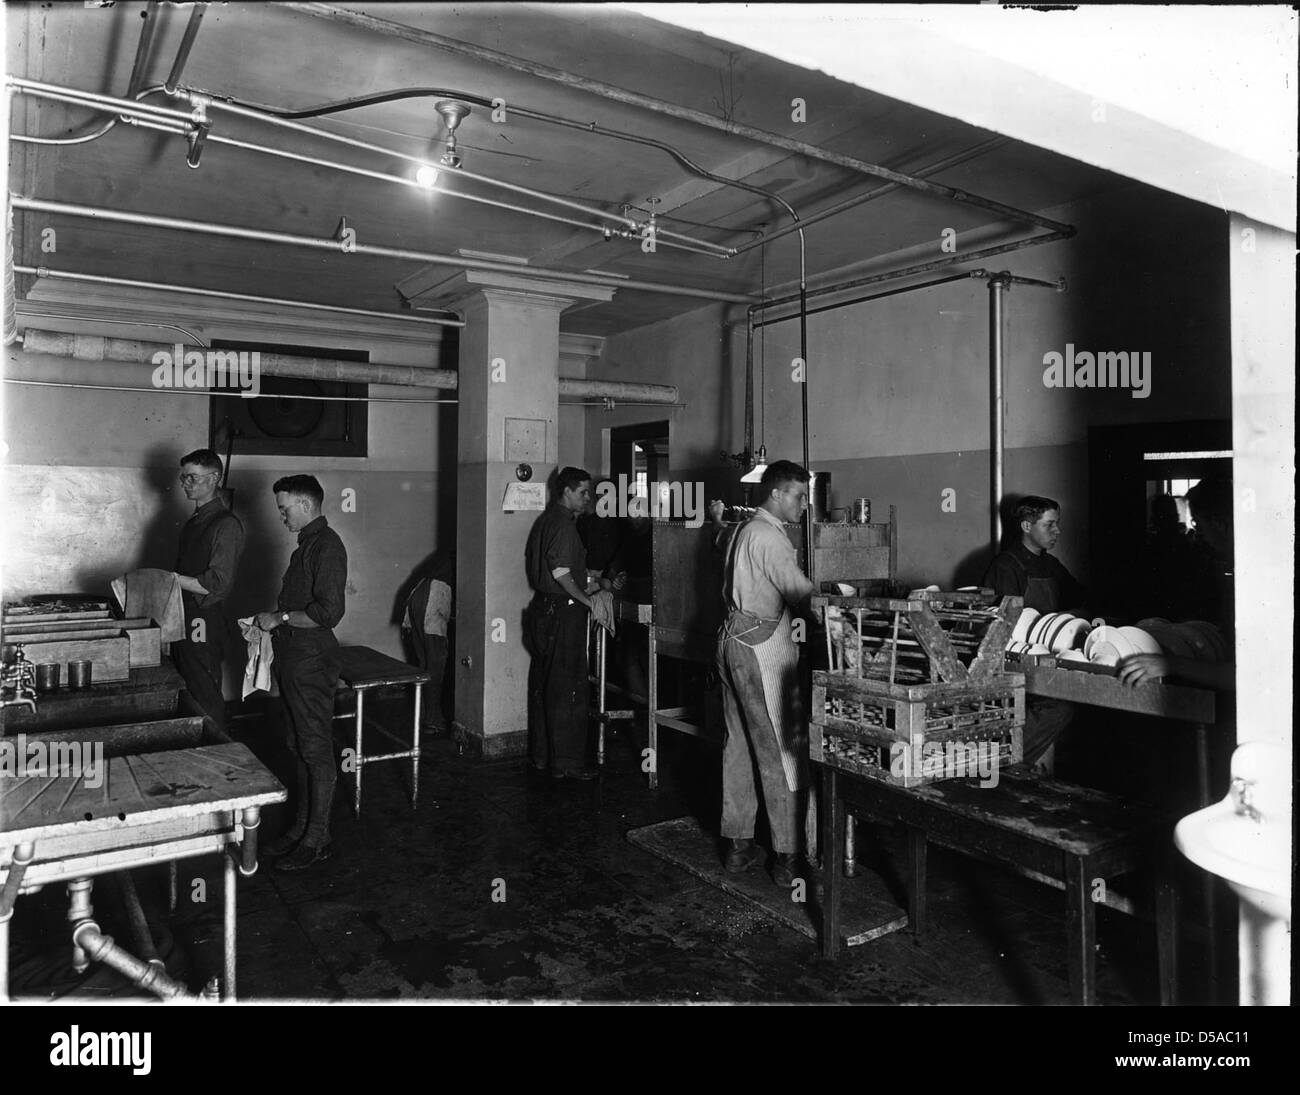 Dish room in home economics cafeteria, with servicemen. Date is 1917-18. Troy photo. Stock Photo